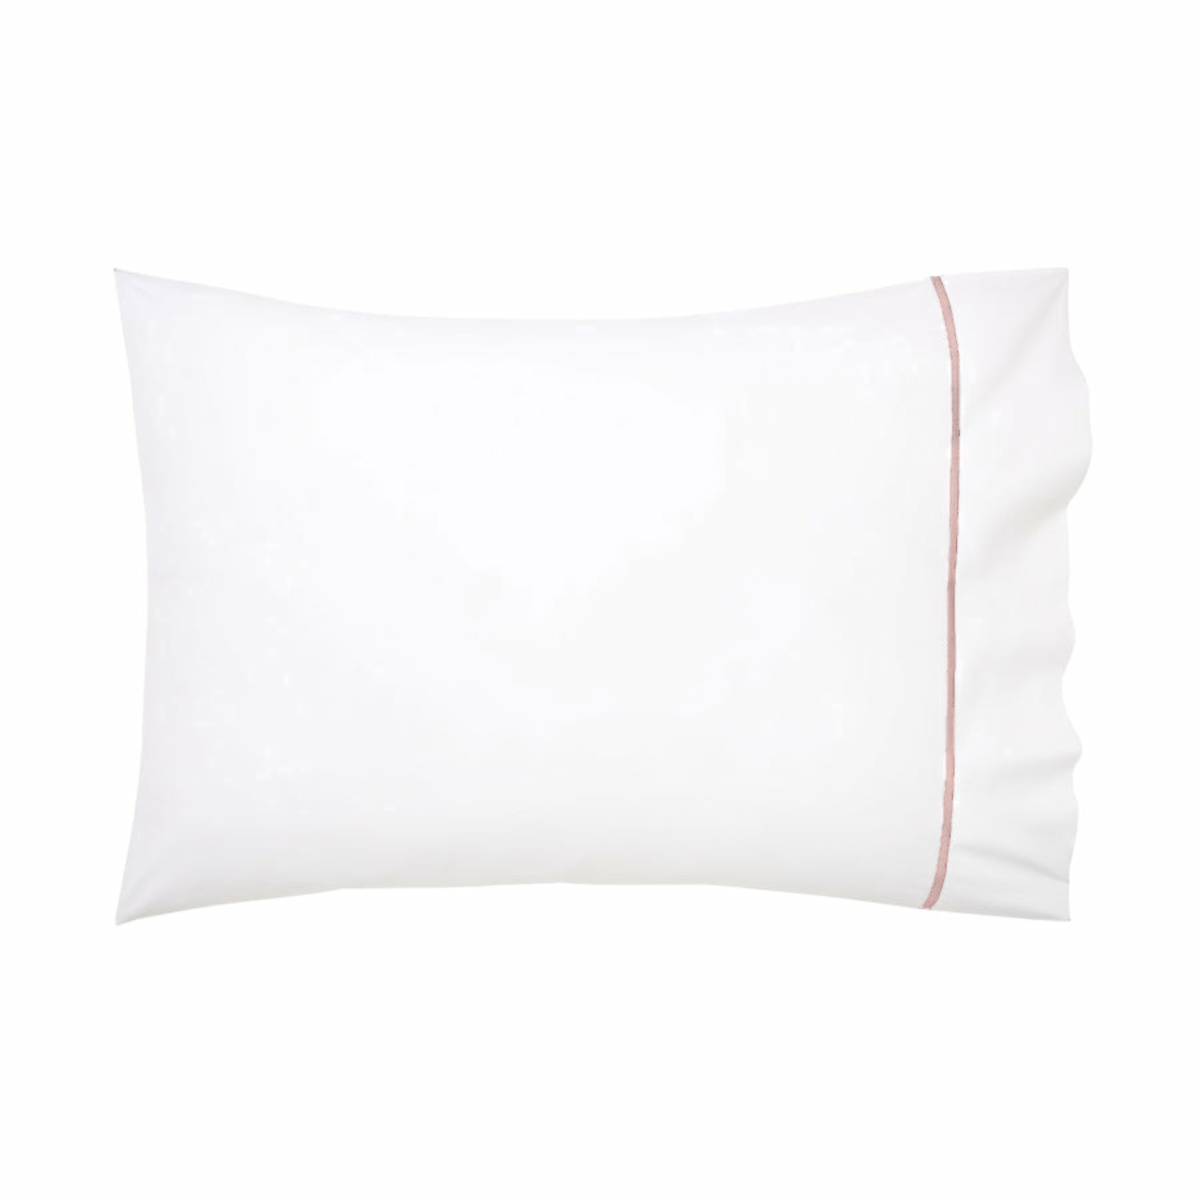 Pillowcase of Yves Delorme Athena Bedding in Poudre Color